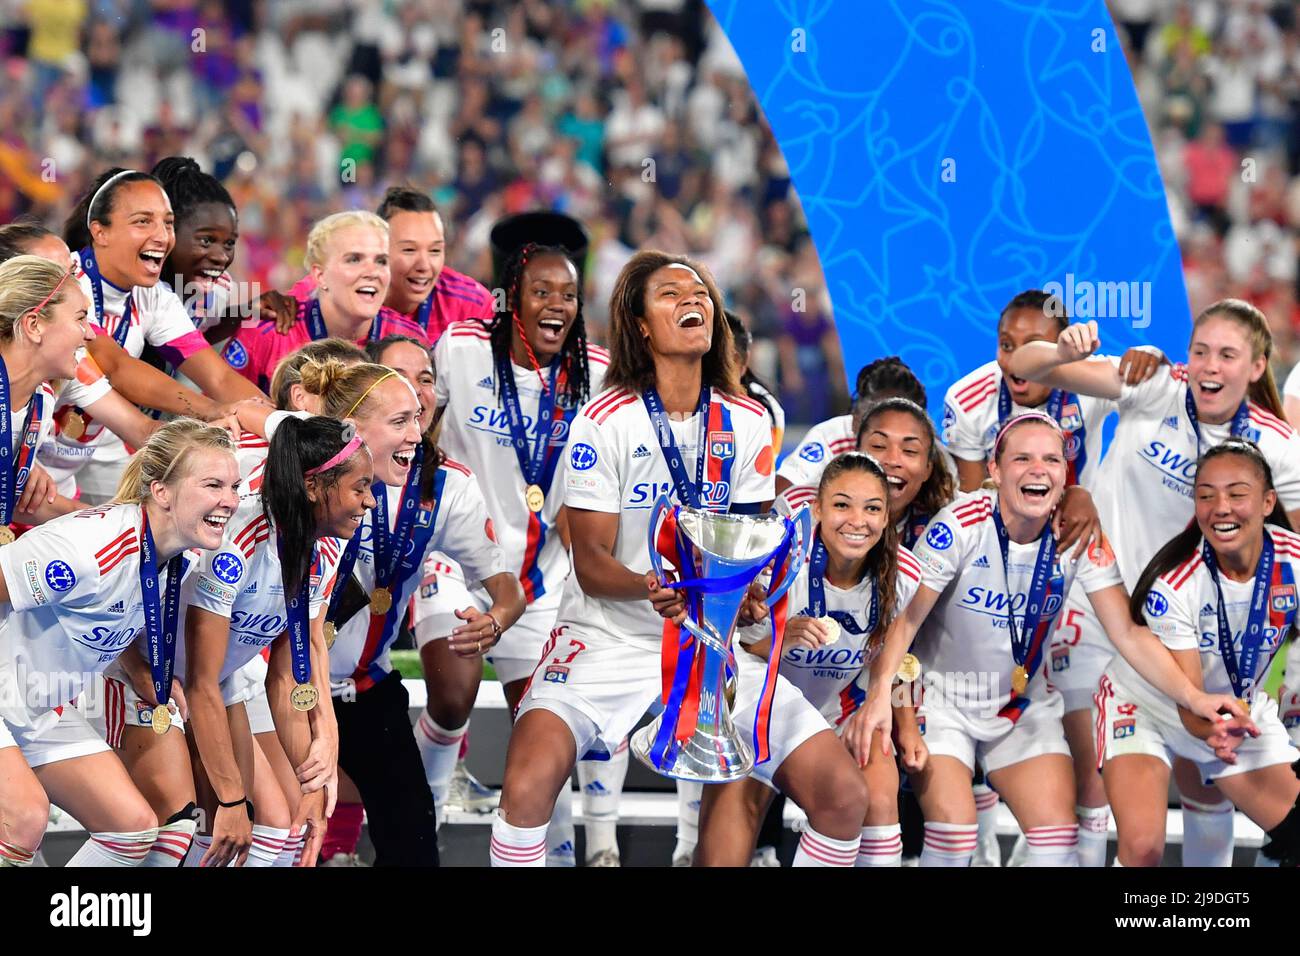 Turin, Italy. 21st, May 2022. Captain Wendie Renard (3) and the team of Olympique Lyon can raise the trophy in joy after winning UEFA Women’s Champions League final between Barcelona and Olympique Lyon at Juventus Stadium in Turin. (Photo credit: Gonzales Photo - Tommaso Fimiano). Stock Photo